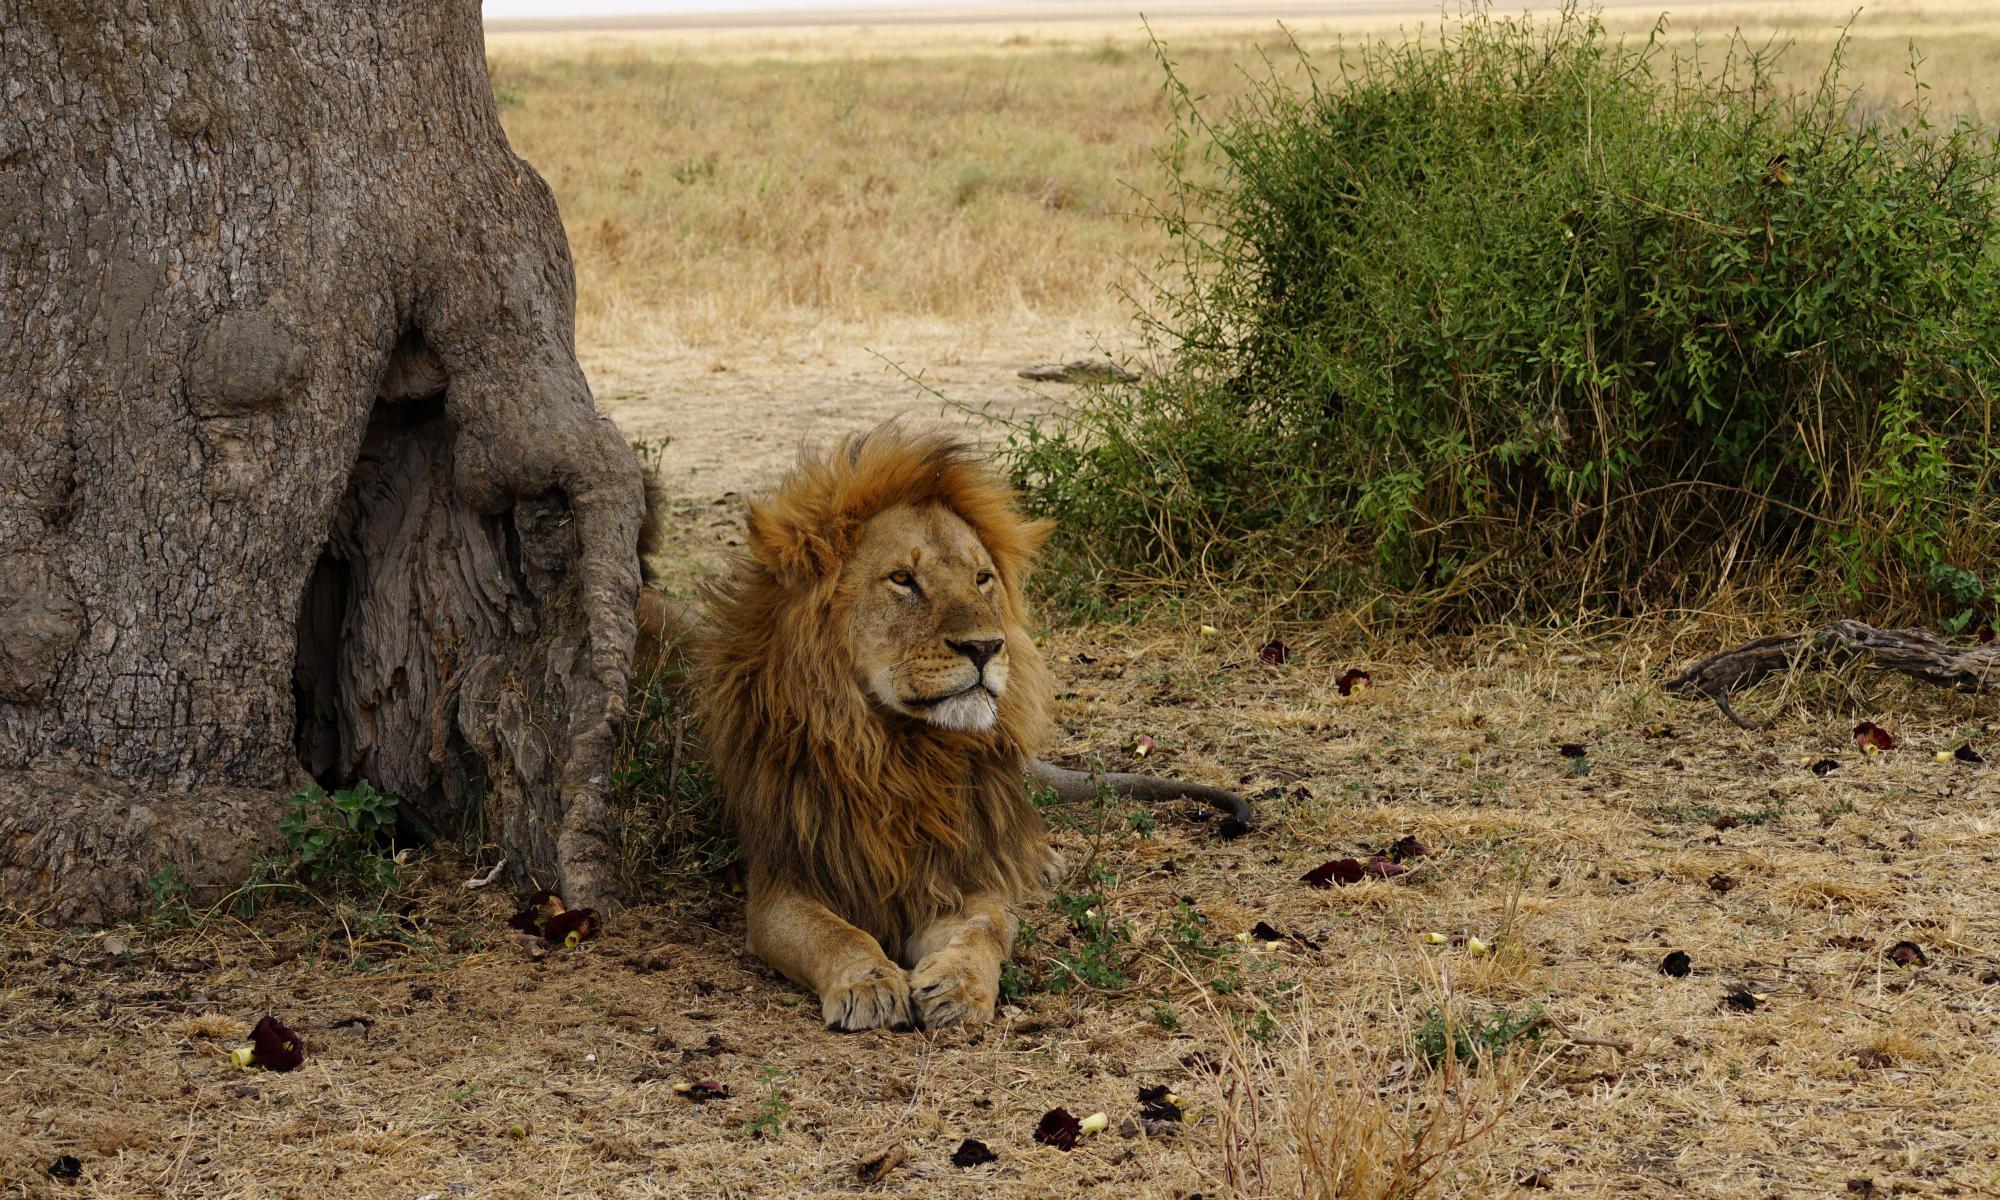 how invasive ants are impeding lions’ hunt